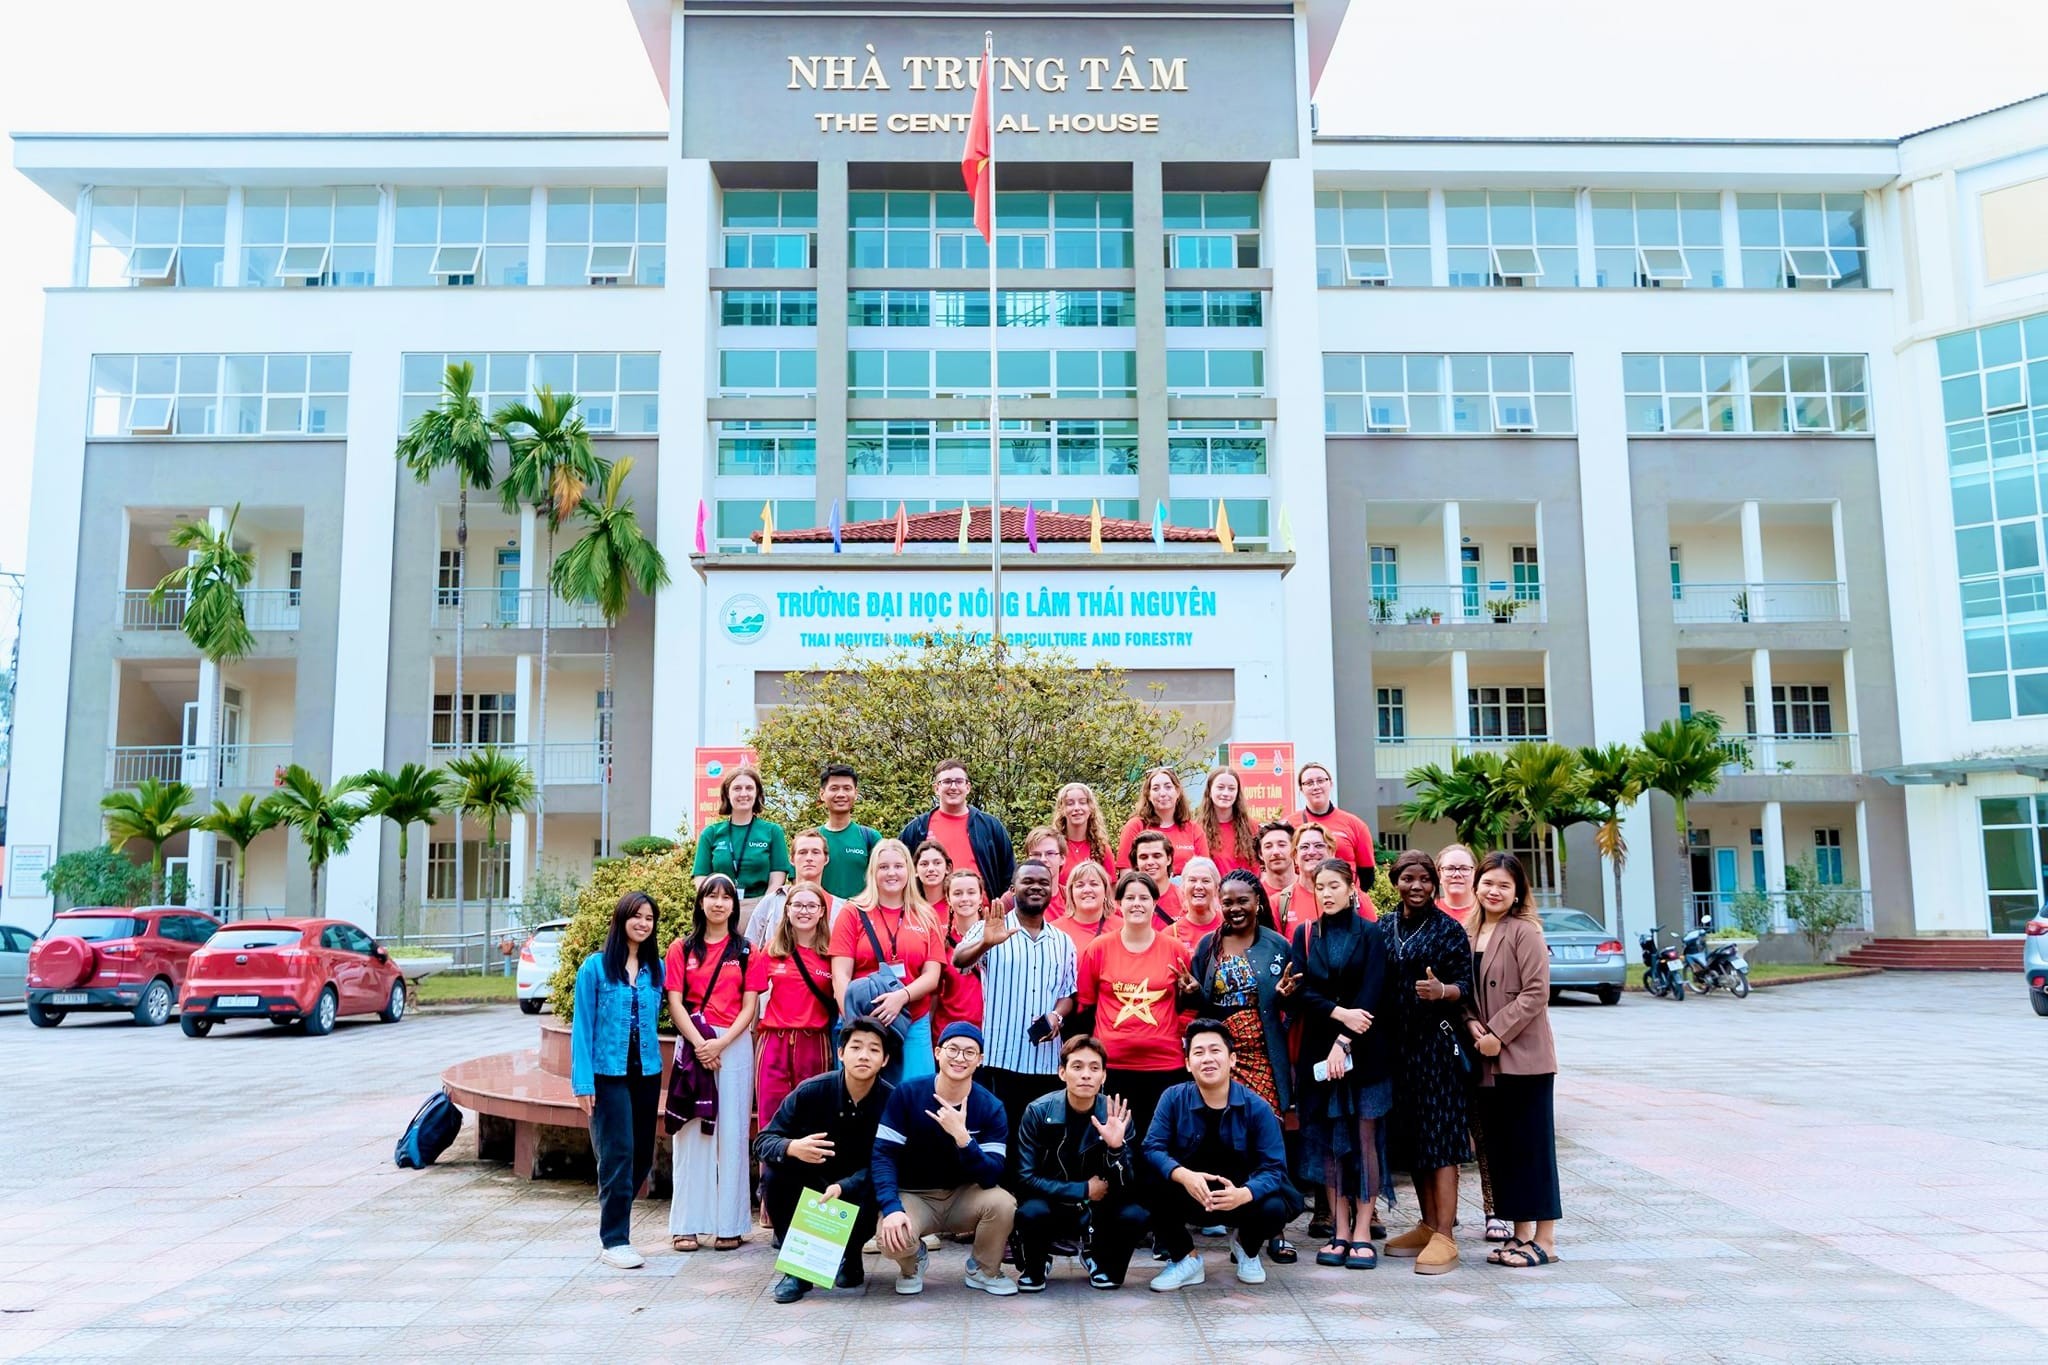 7-DAY WORK IMMERSION (UNIGO) OF UNIVERSITY OF TASMANIA STUDENTS IN THE ADVANCED EDUCATION PROGRAM AT THAI NGUYEN UNIVERSITY OF AGRICULTURE AND FORESTRY